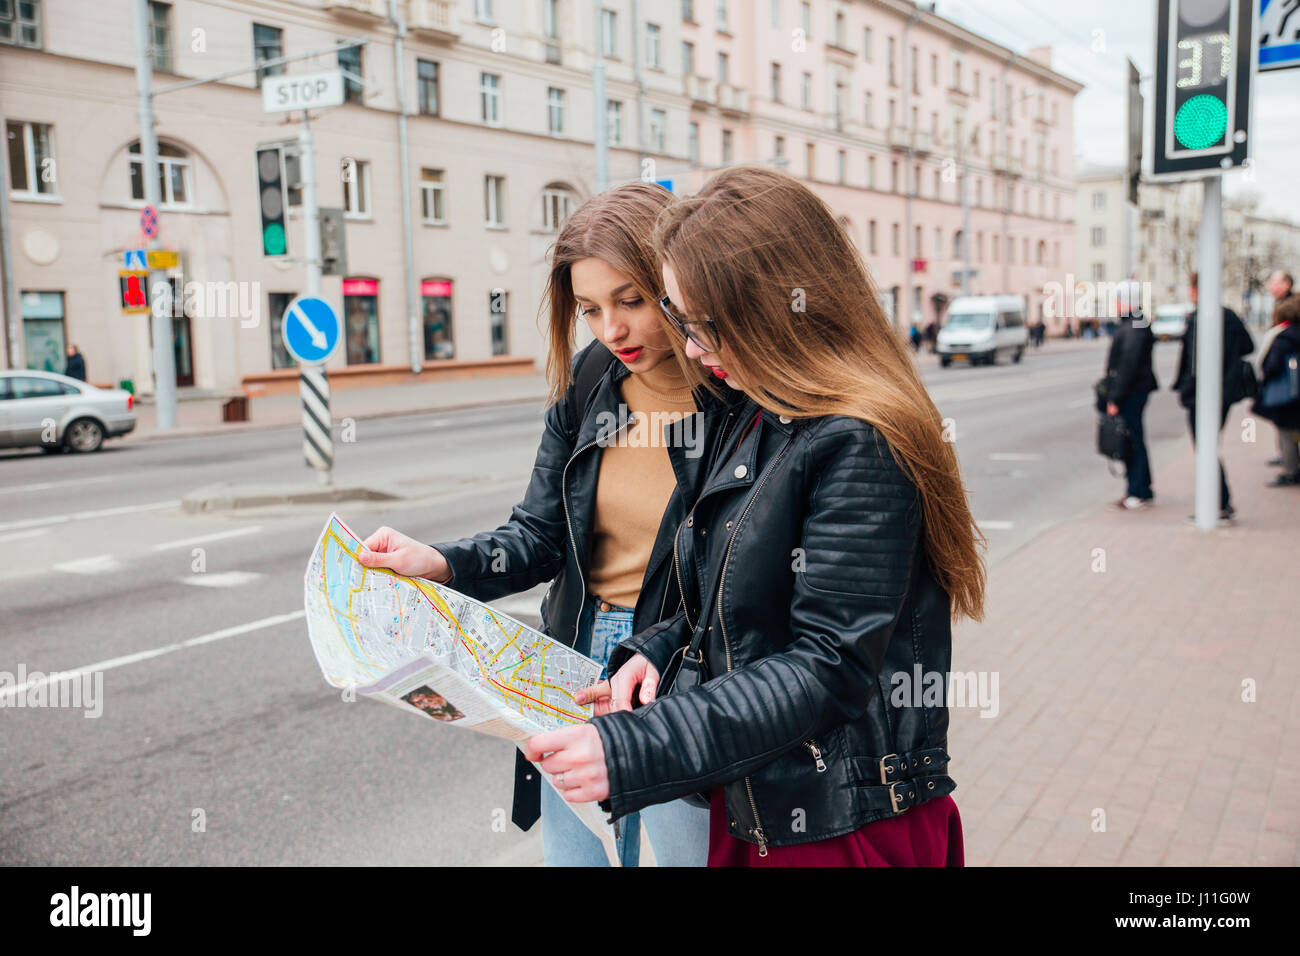 Two young stylish women traveling and looking at the map in city Stock Photo